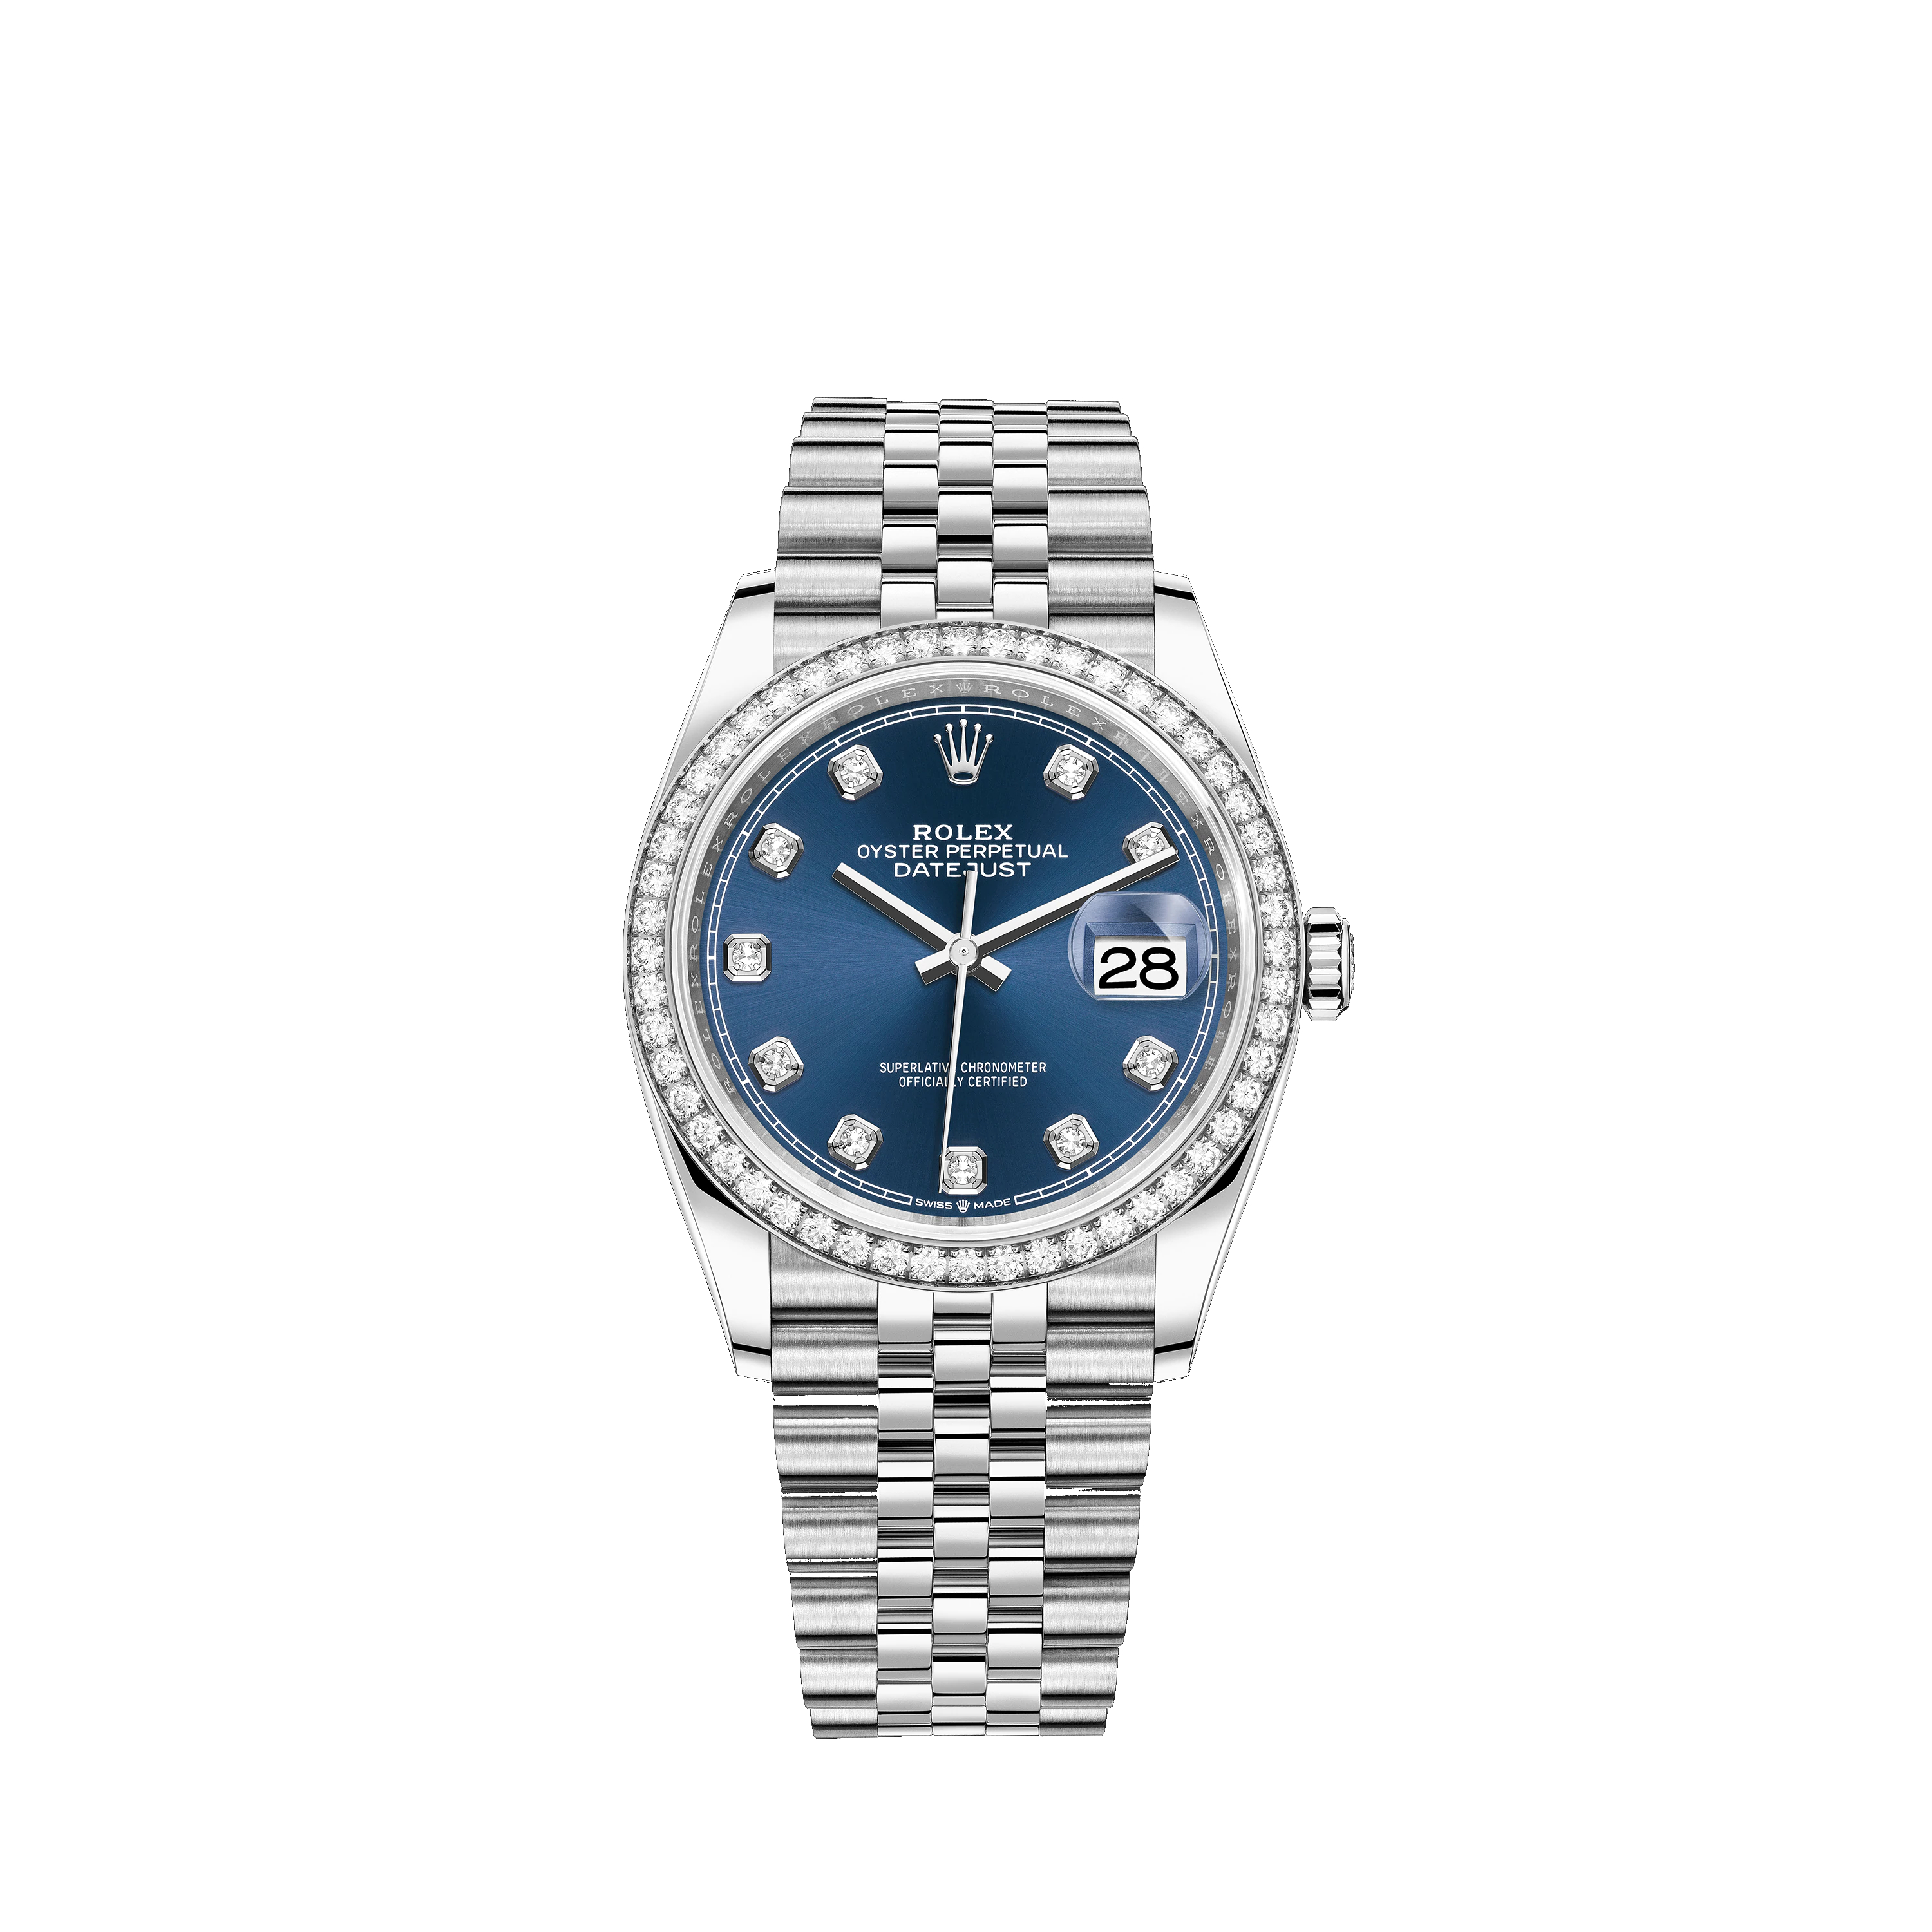 Datejust 36 126284RBR White Gold, Stainless Steel & Diamonds Watch (Blue Set with Diamonds) - Click Image to Close